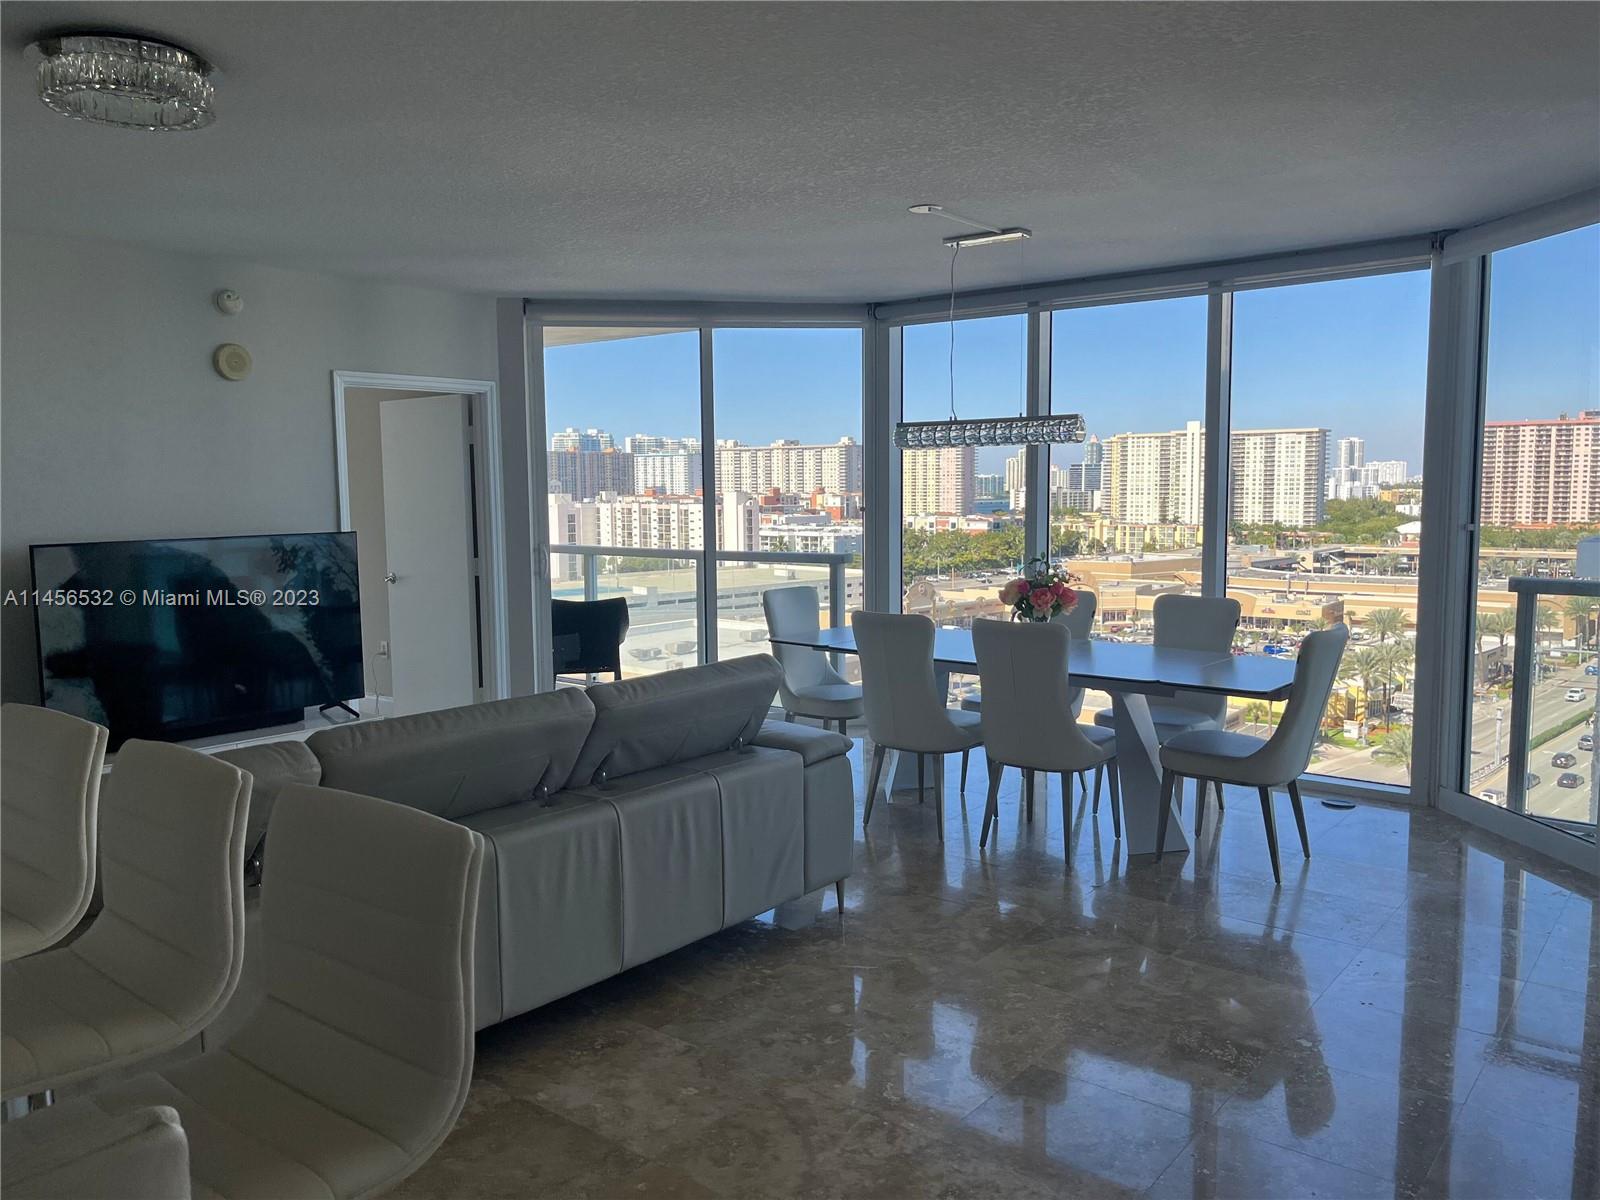 In the heart of Sunny Isles, enjoy resort-style living in large 2 bedroom/2 bath upgraded corner apartment with desirable north-west view of the ocean, intracoastal & city from wrap-around terrace & additional balcony. Freshly painted, marble floors, 3 new mattresses, tastefully redecorated with new appliances & furniture, fully equipped for family vacation. Resort-style amenities that include beach service, pool, fitness center, jacuzzi, pool cabanas, concierge, valet parking, kids room, 24 hours security. Walking distance to restaurants, shopping, entertainment & public transportation. Minutes to Aventura Mall, Gulfstream Casino and Bal Harbour Shops. STR- 02197. 
Available 3/15-3/31 ans 4/15-4/30